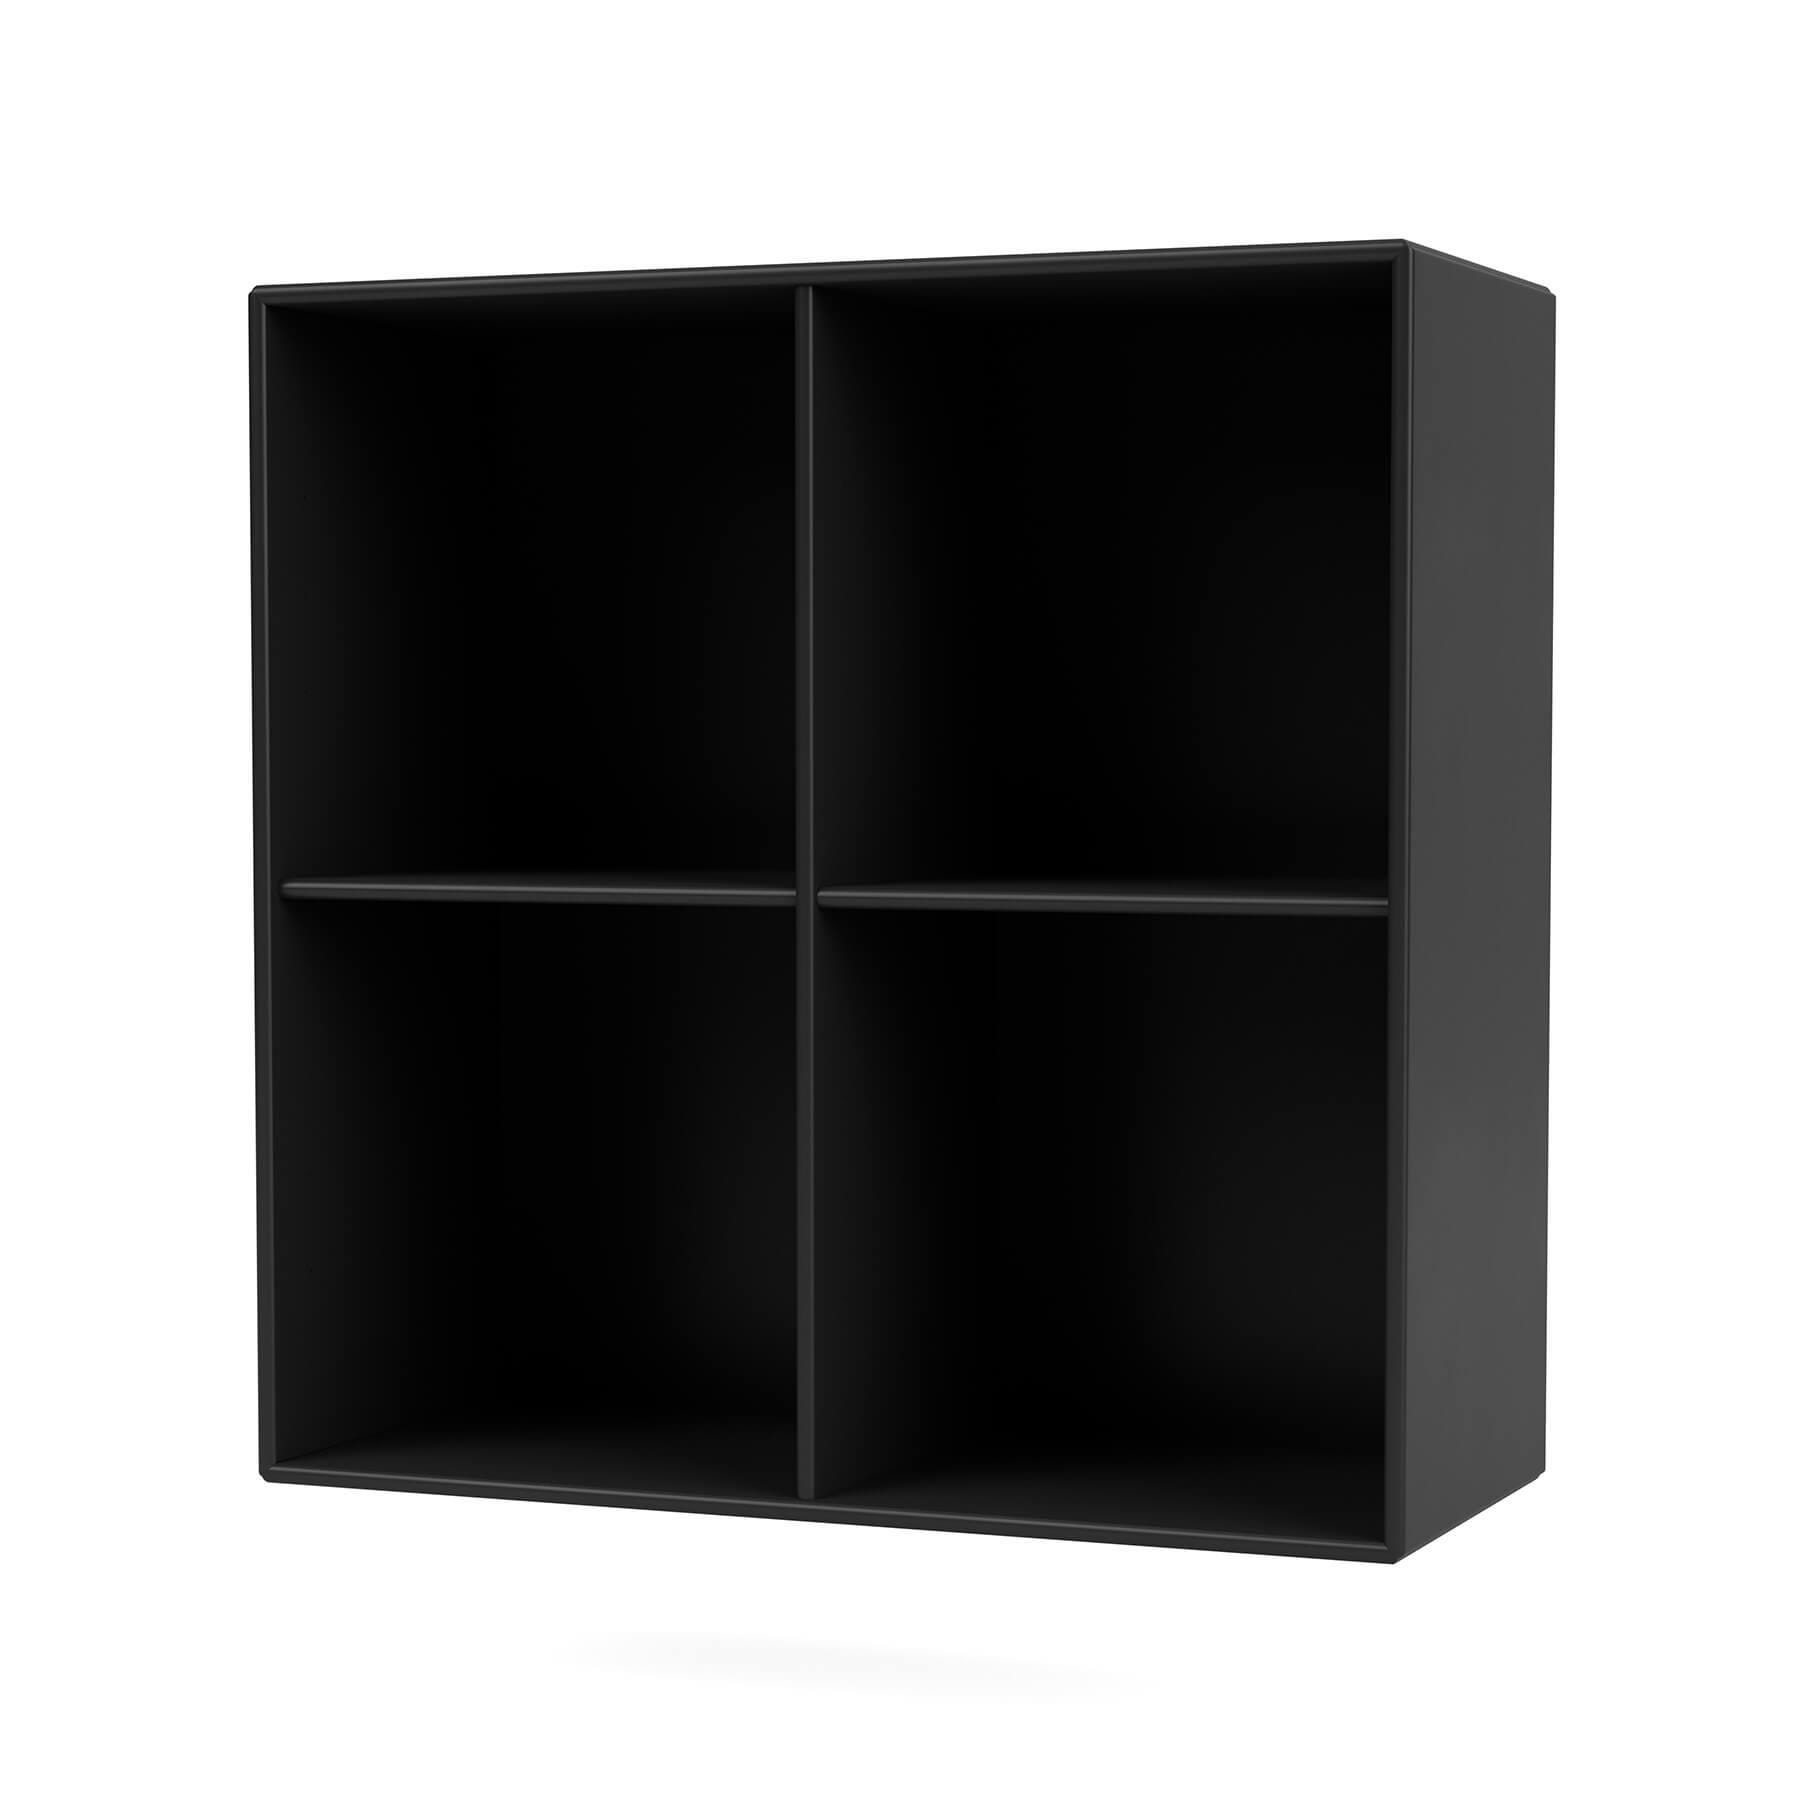 Montana Show Bookcase Black Wall Mounted Black Designer Furniture From Holloways Of Ludlow